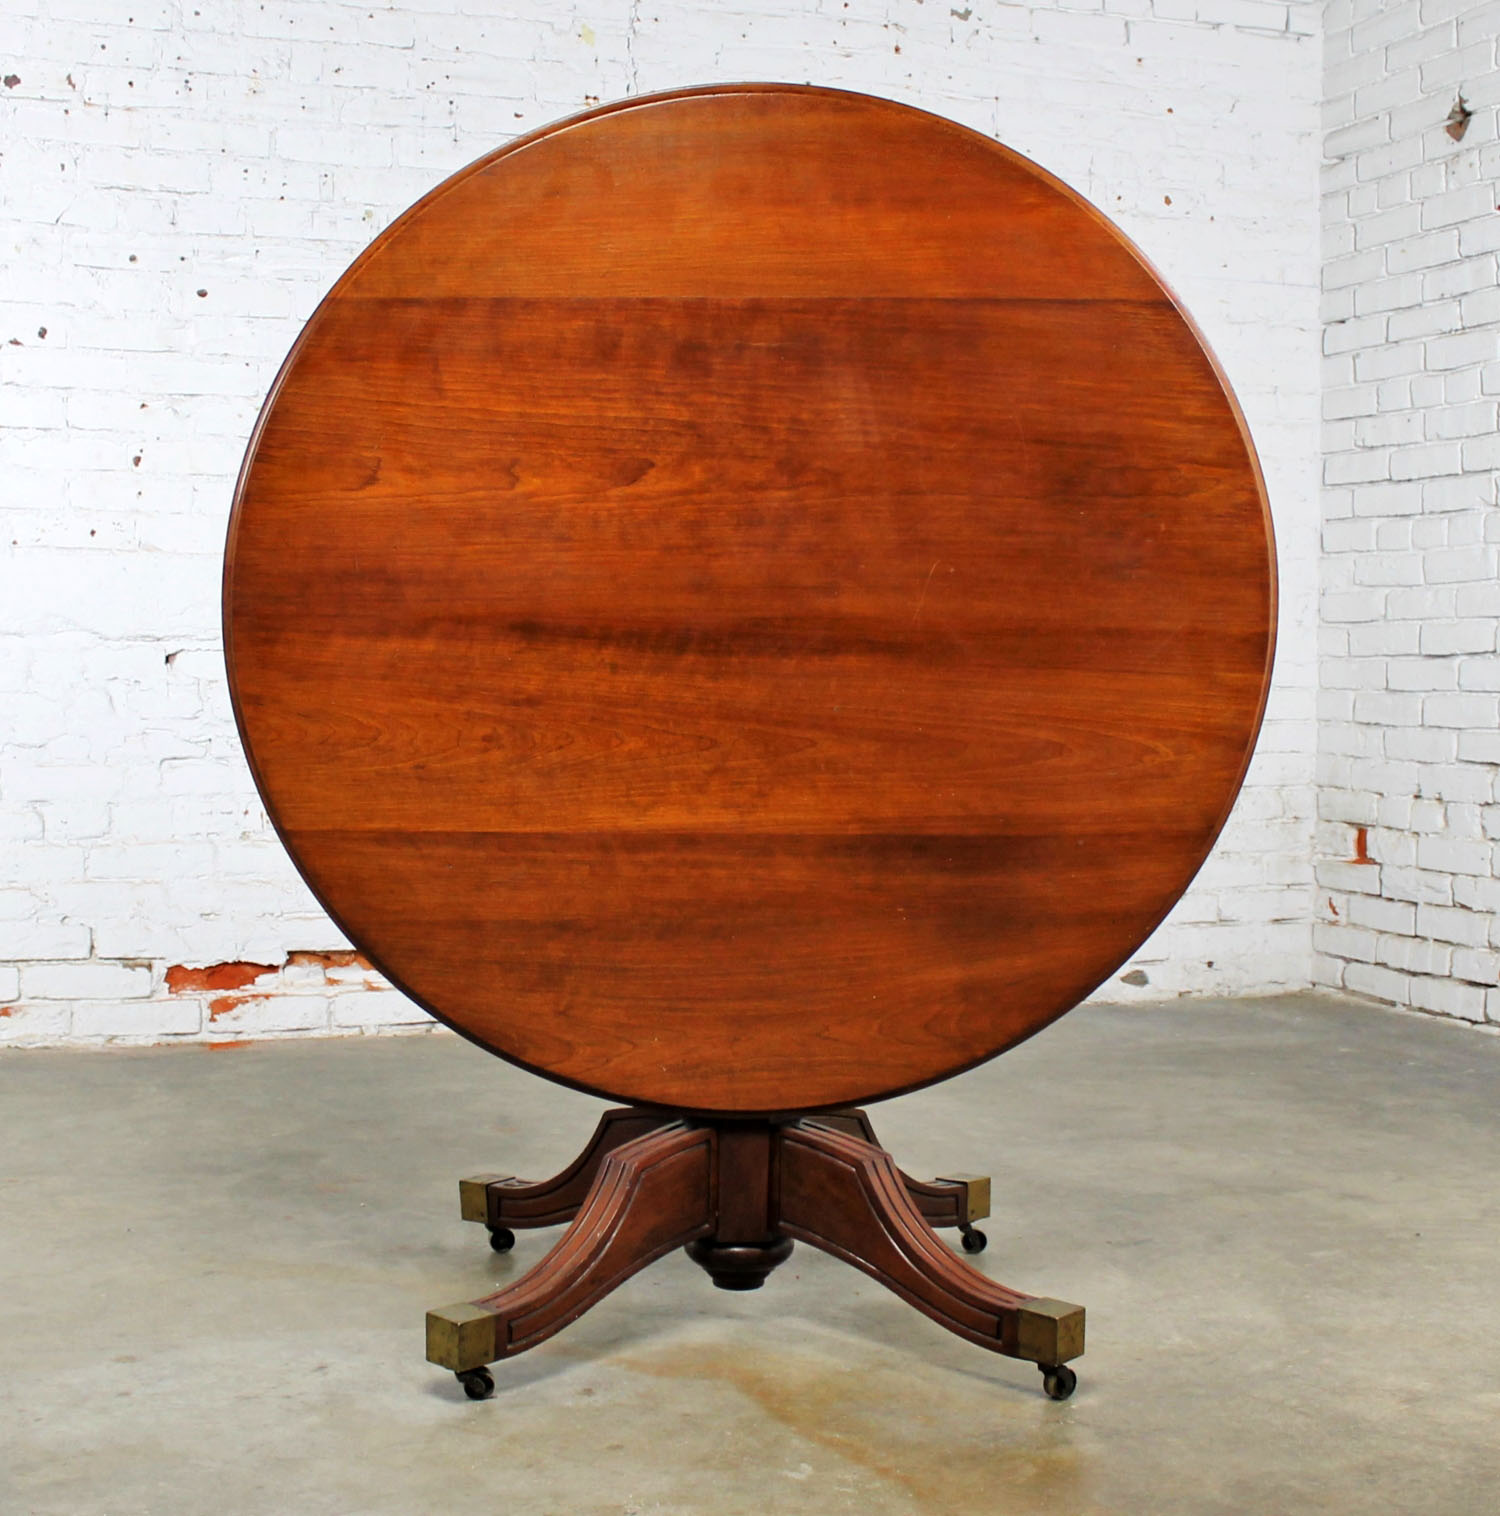 Classical Regency Carved Mahogany Round Tilt-Top Breakfast or Center Table